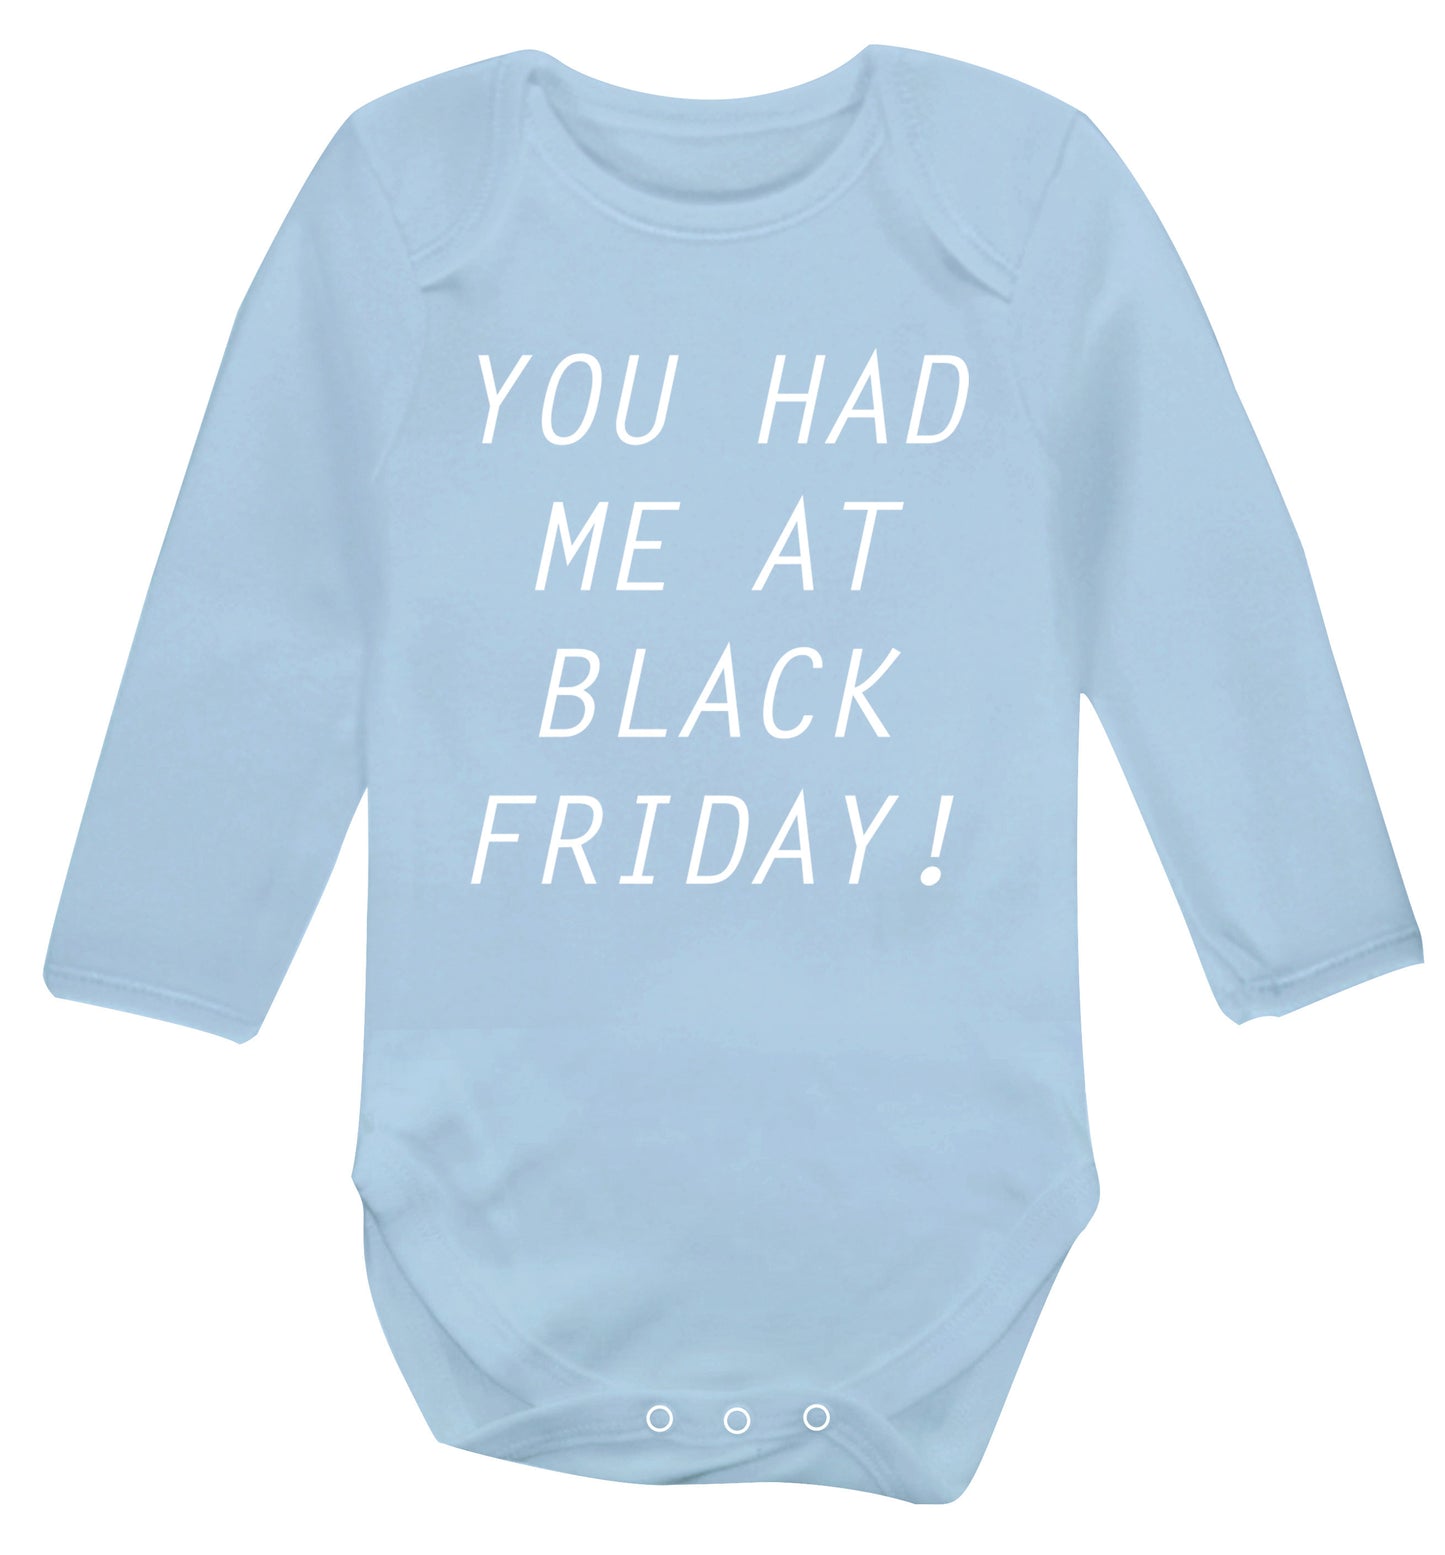 You had me at black friday Baby Vest long sleeved pale blue 6-12 months